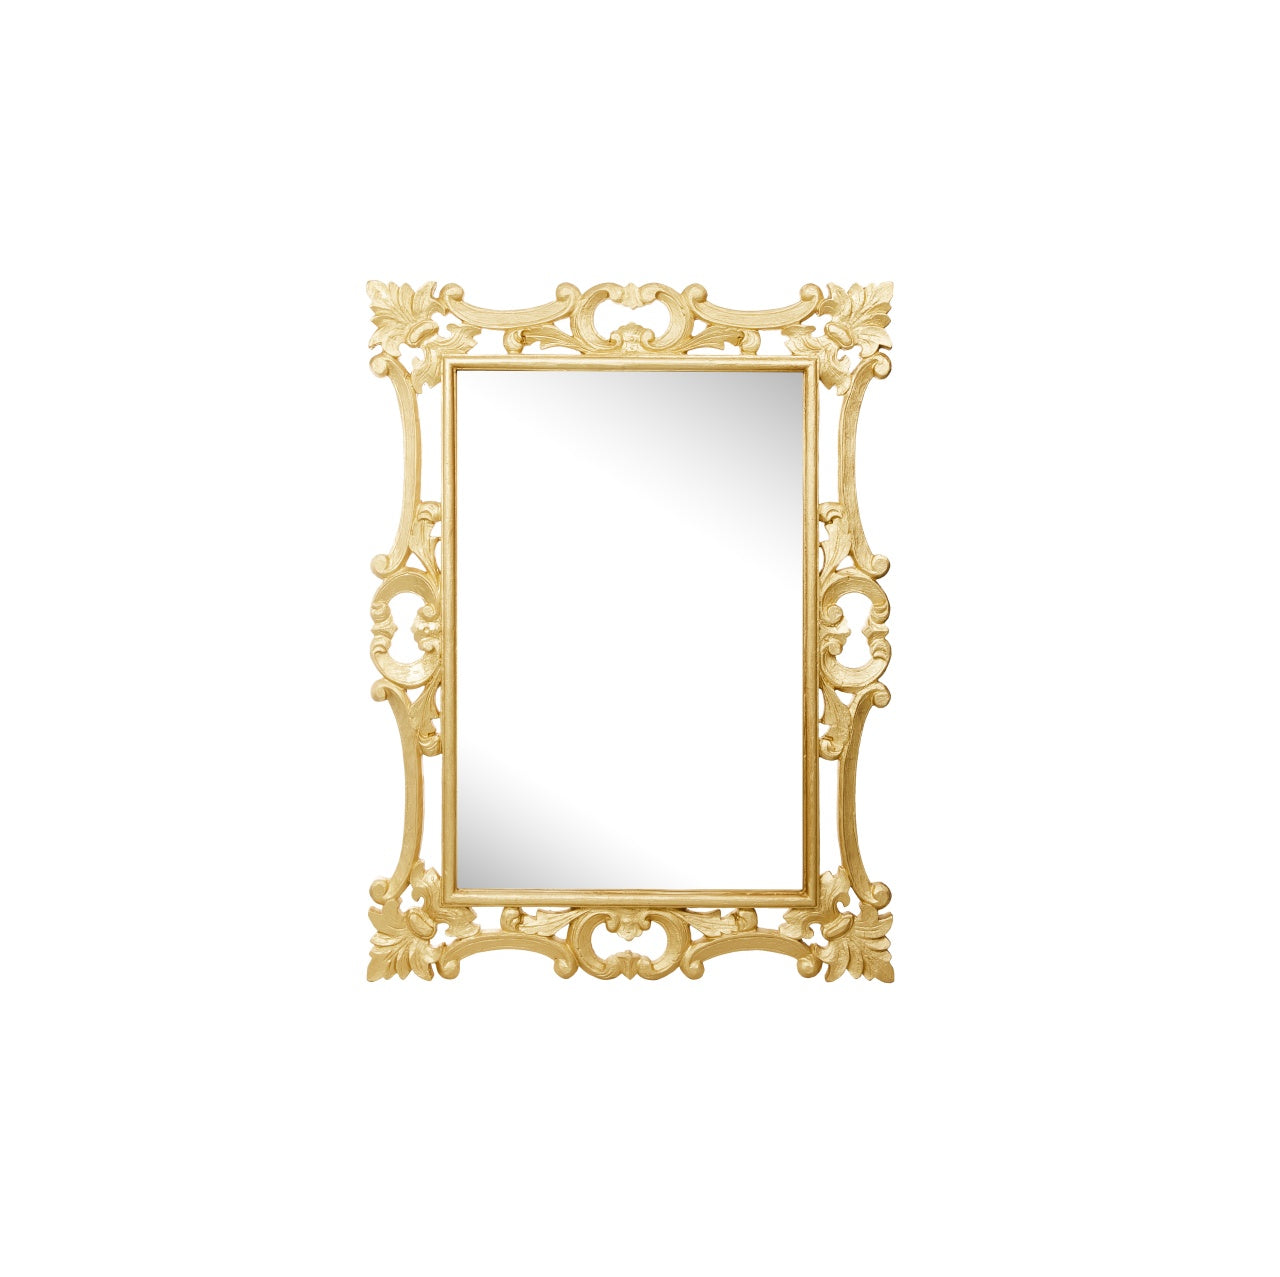 Izzi Small Gold - Paramount Mirrors and Prints